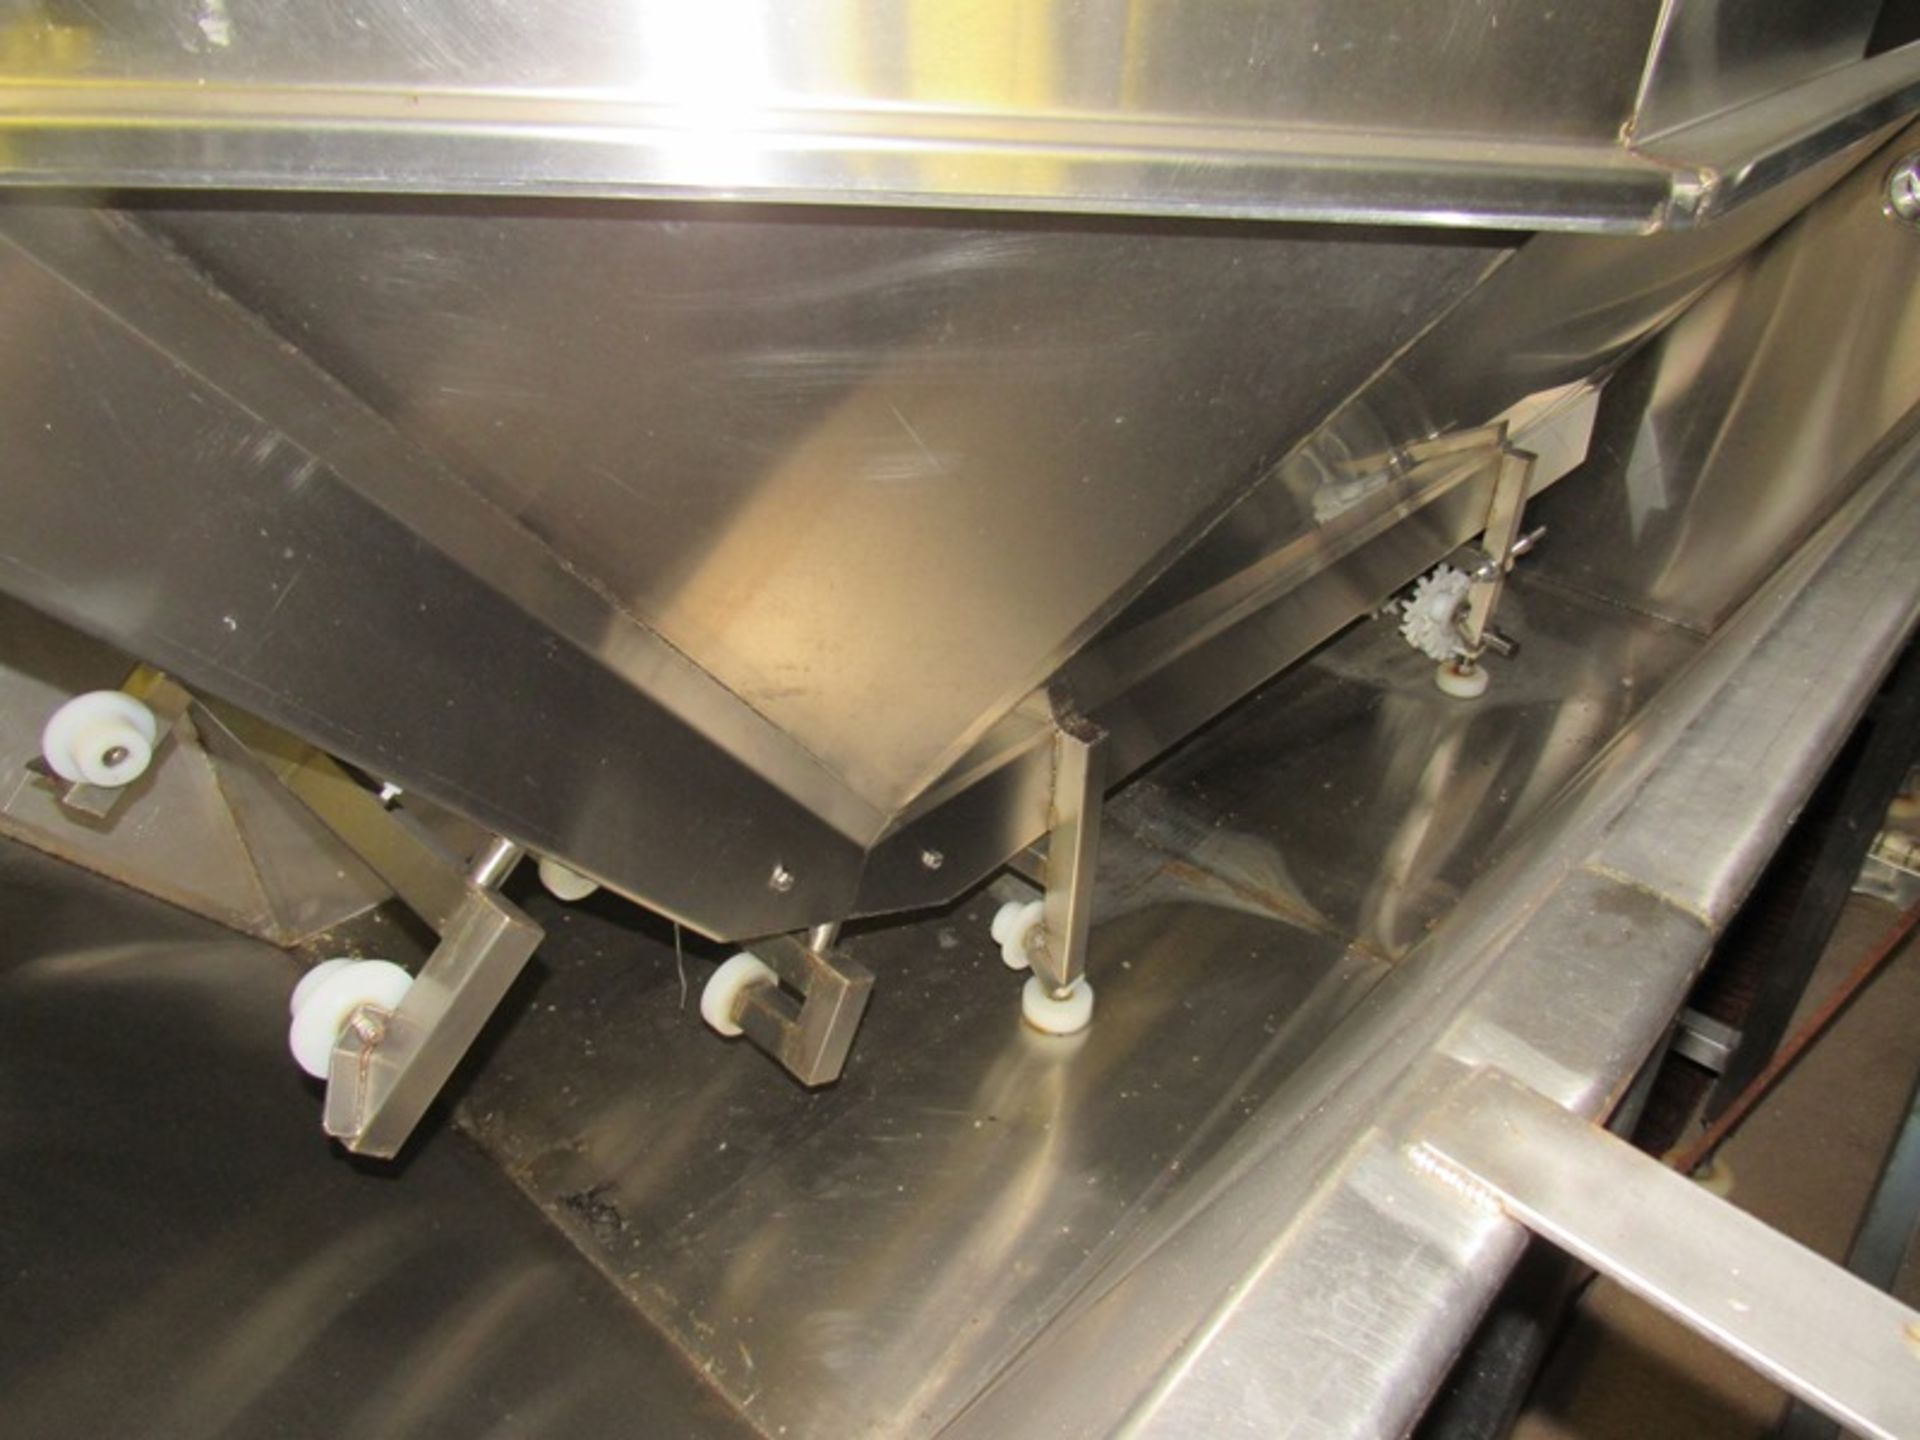 Stainless Steel Tank, 64" W X 112" L X 3' D with 16" W X 6' L incline conveyor (no belt), 1 h.p., - Image 3 of 6